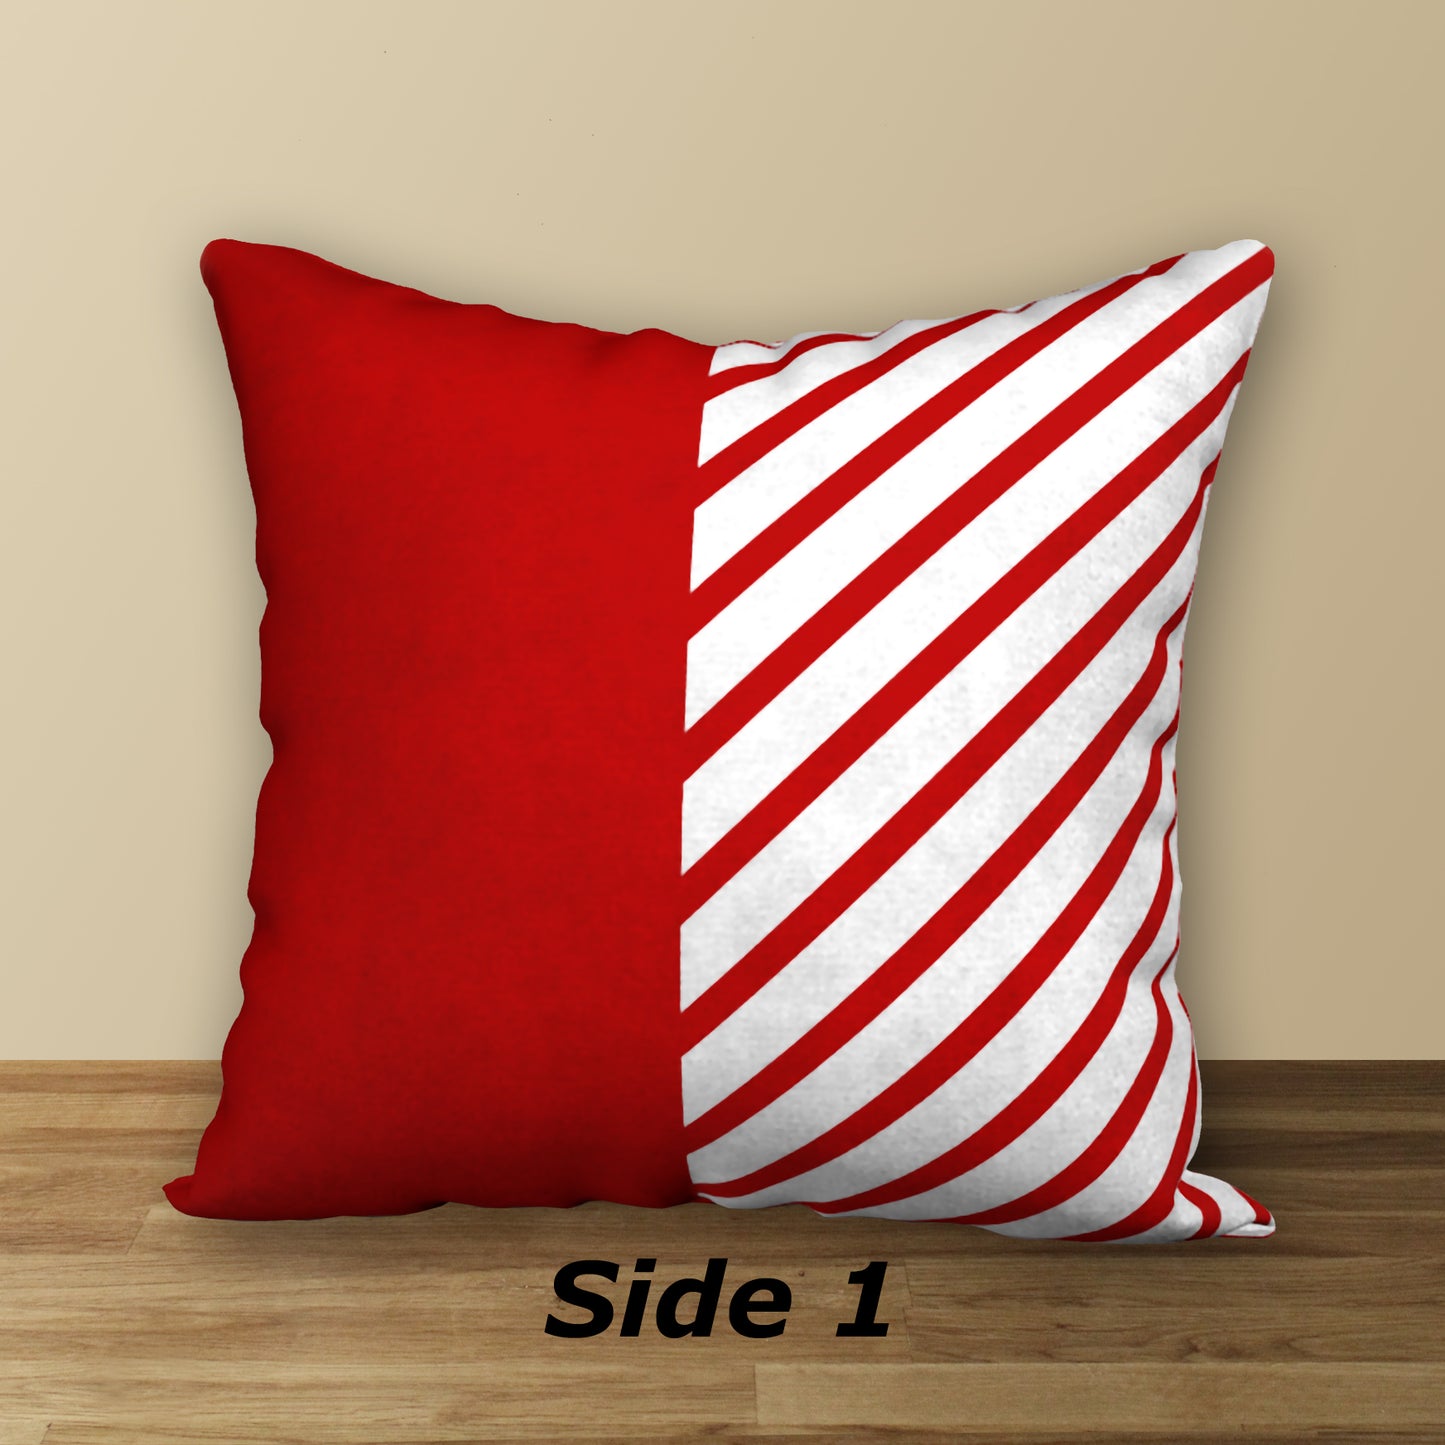 Red & White Designer Christmas Pillow Candy Cane Stripes with Polka Dots, 18"x18"